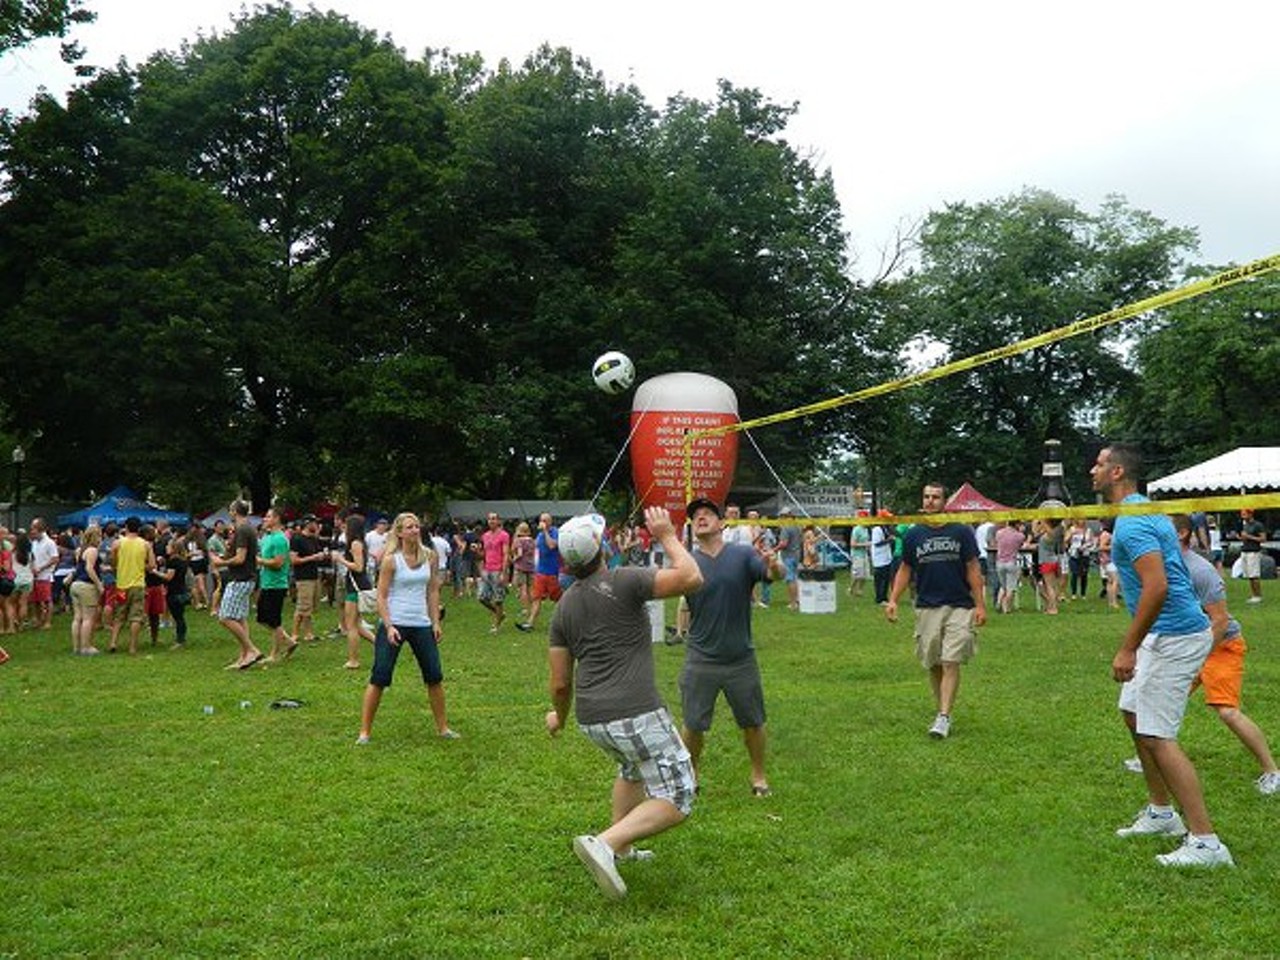 Round up a handful of other semi-drunken Clevelanders for a fun game of volleyball or cornhole.